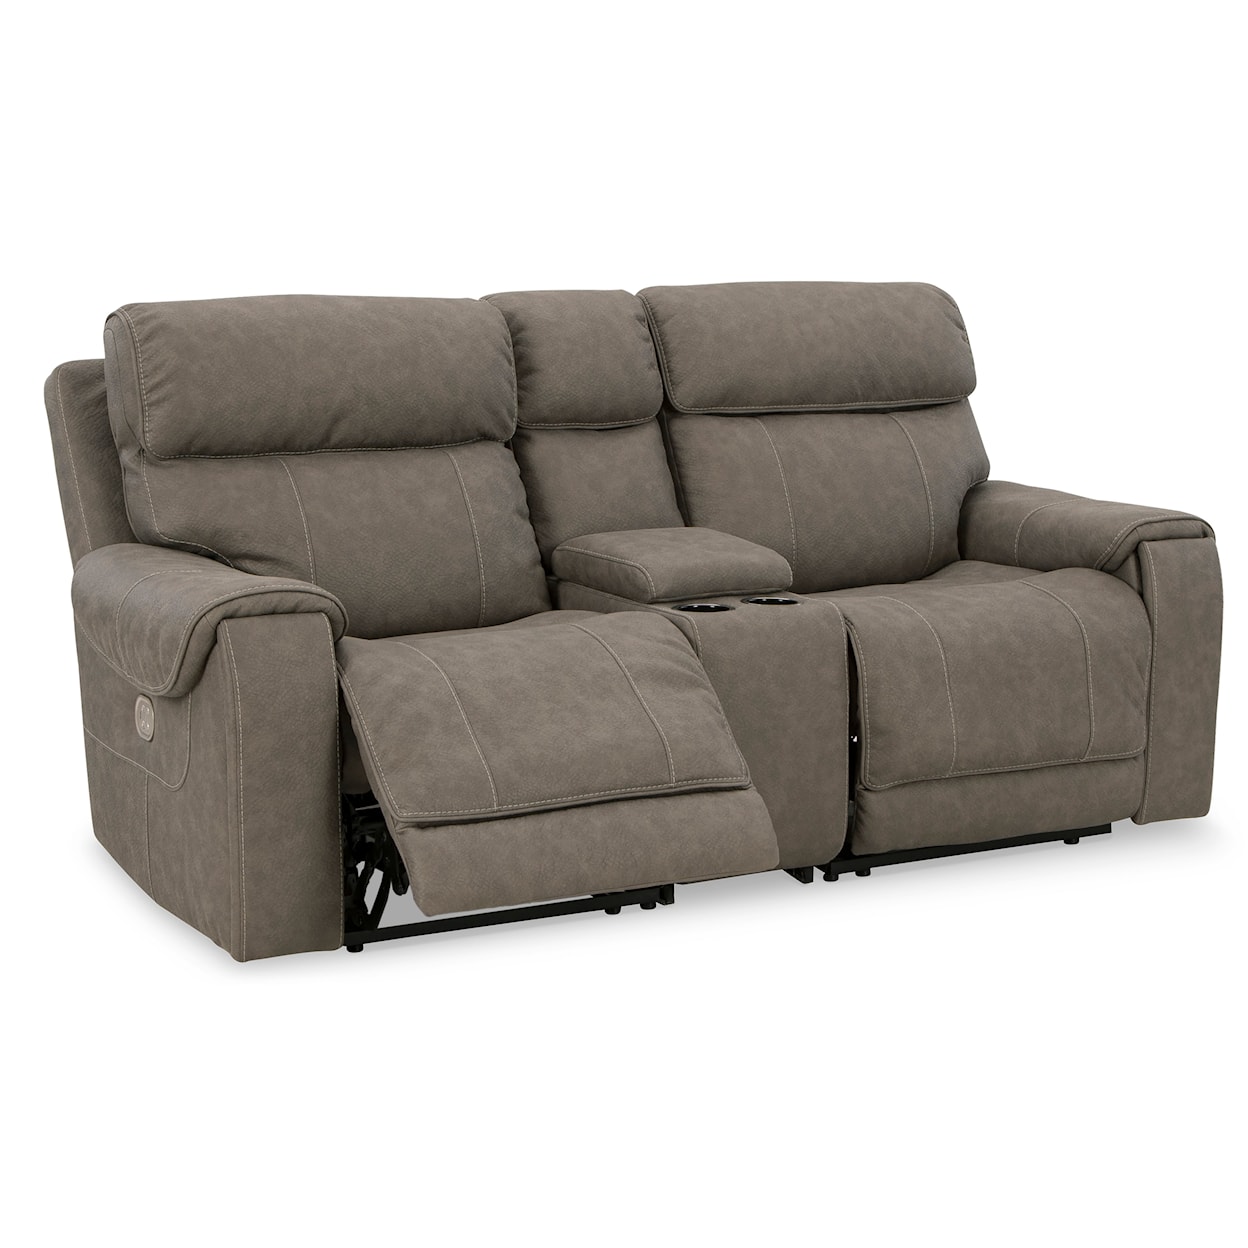 Signature Design by Ashley Furniture Starbot 3-Piece Power Reclining Loveseat